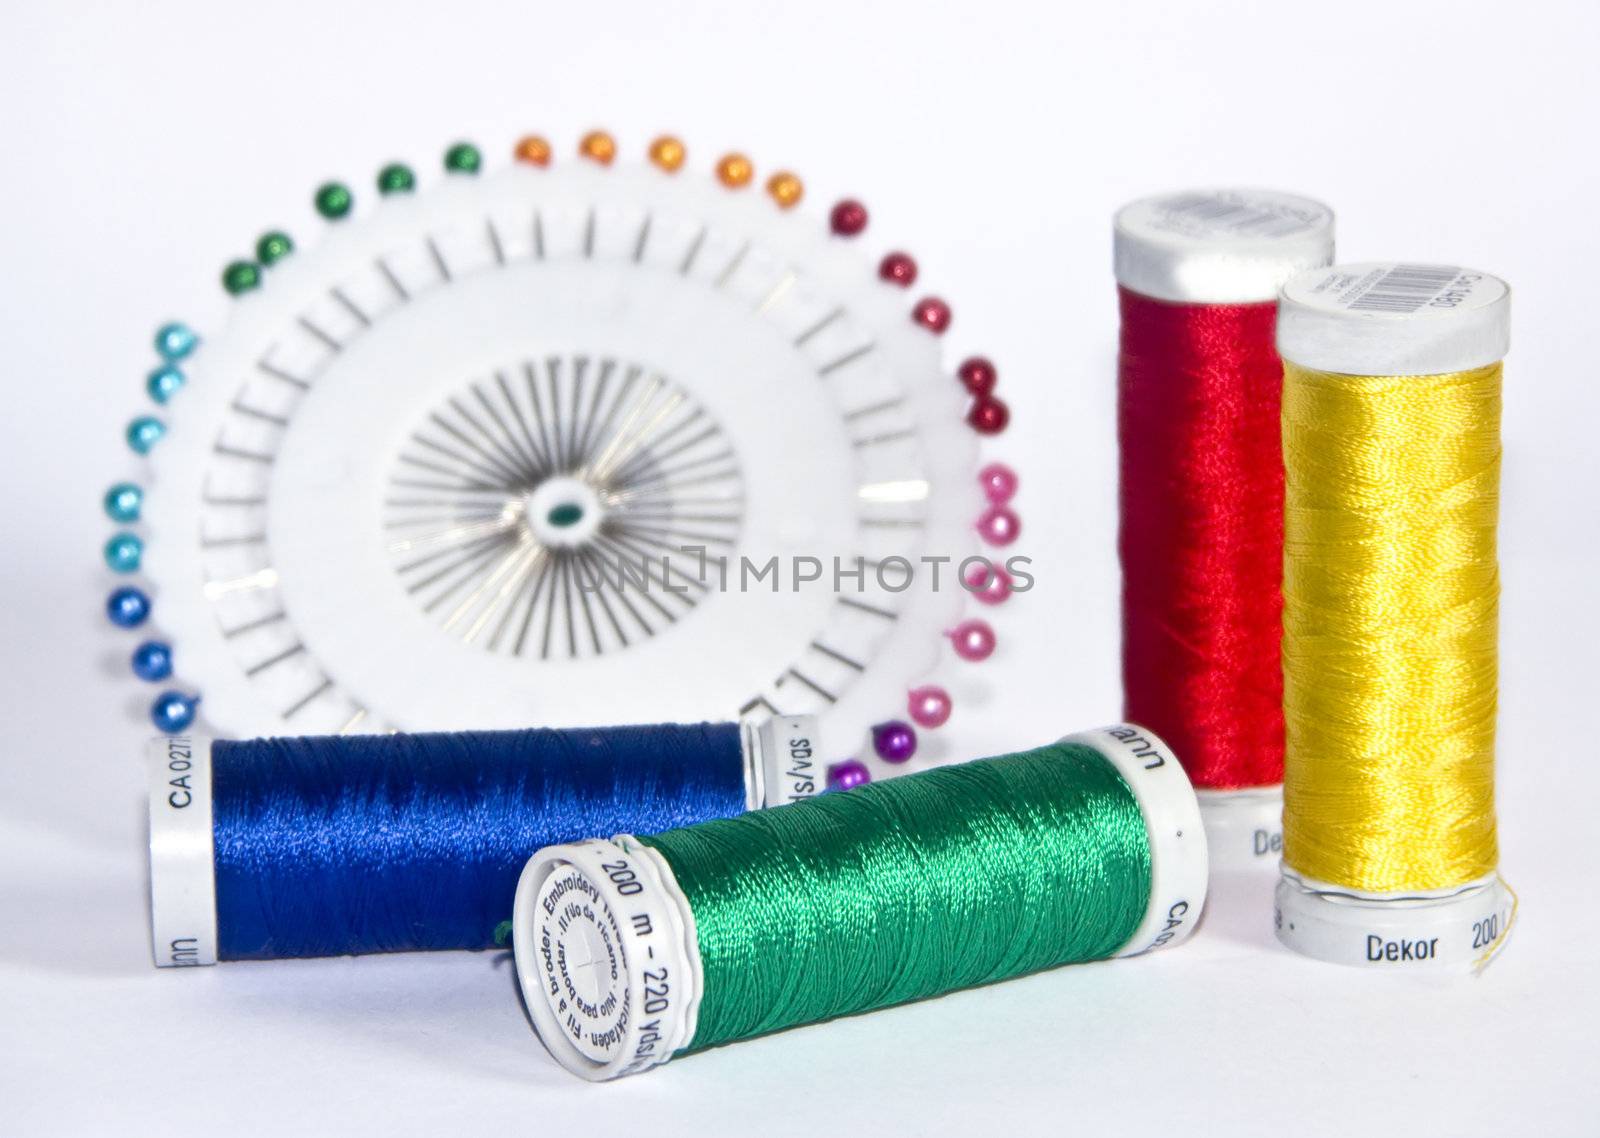 The image of strings for a machine embroidery and pins